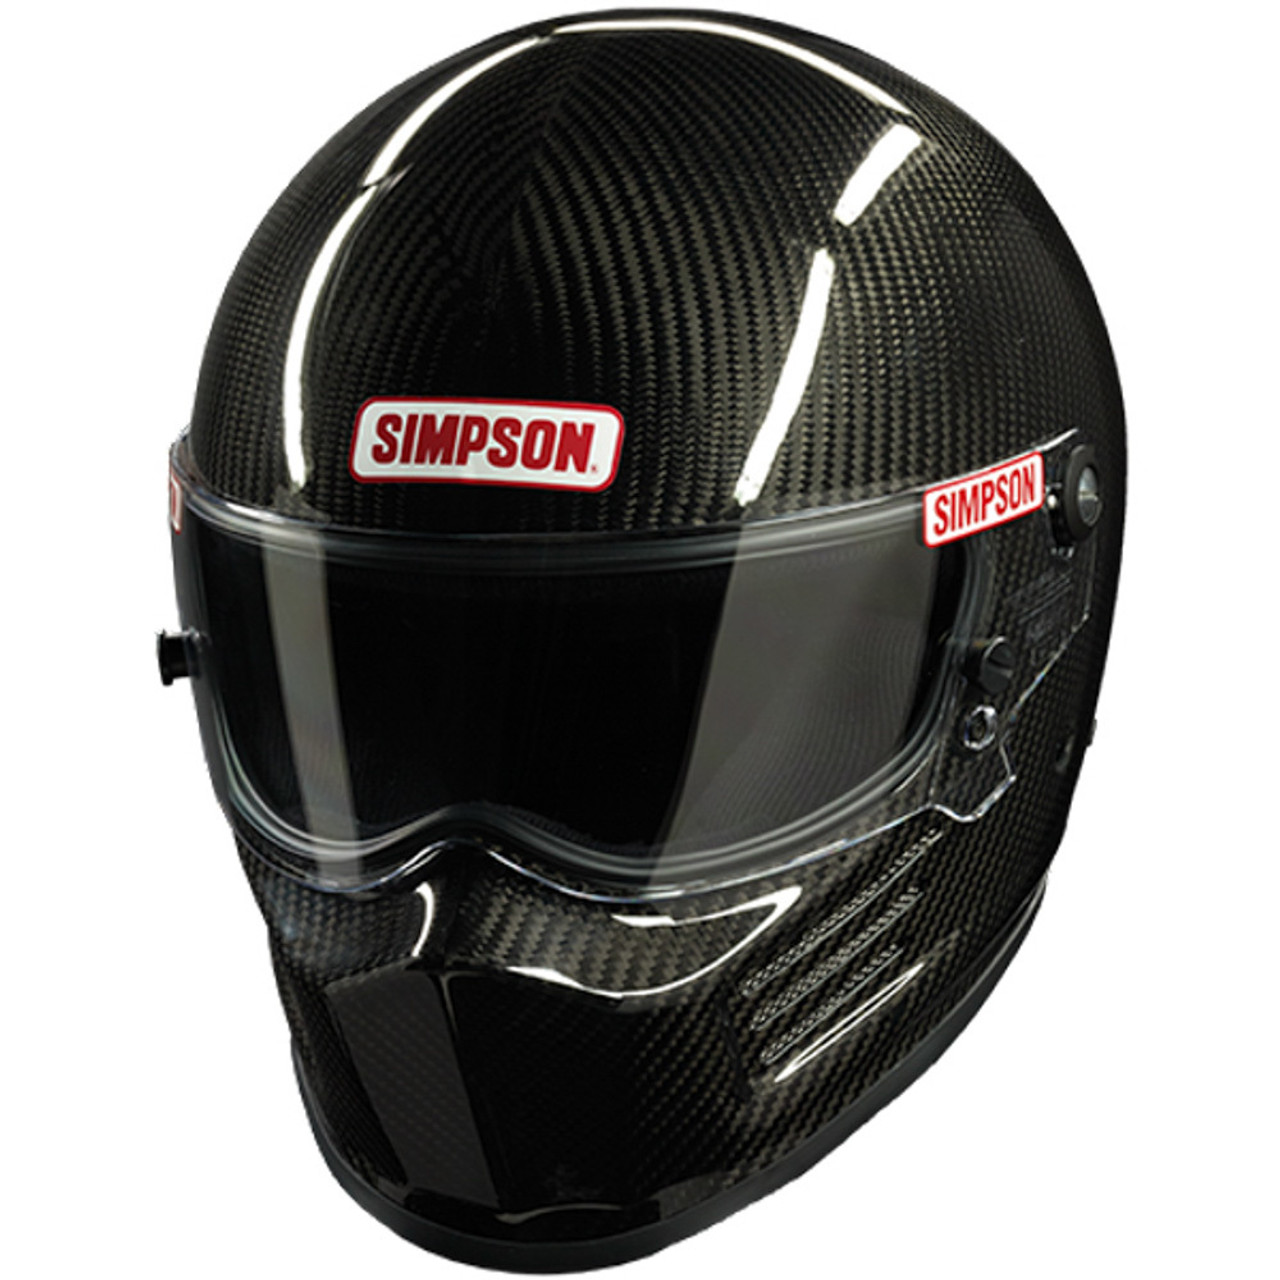 Helmet, Bandit, Snell SA2020, Head and Neck Support Ready, Carbon Fiber, Large, Each